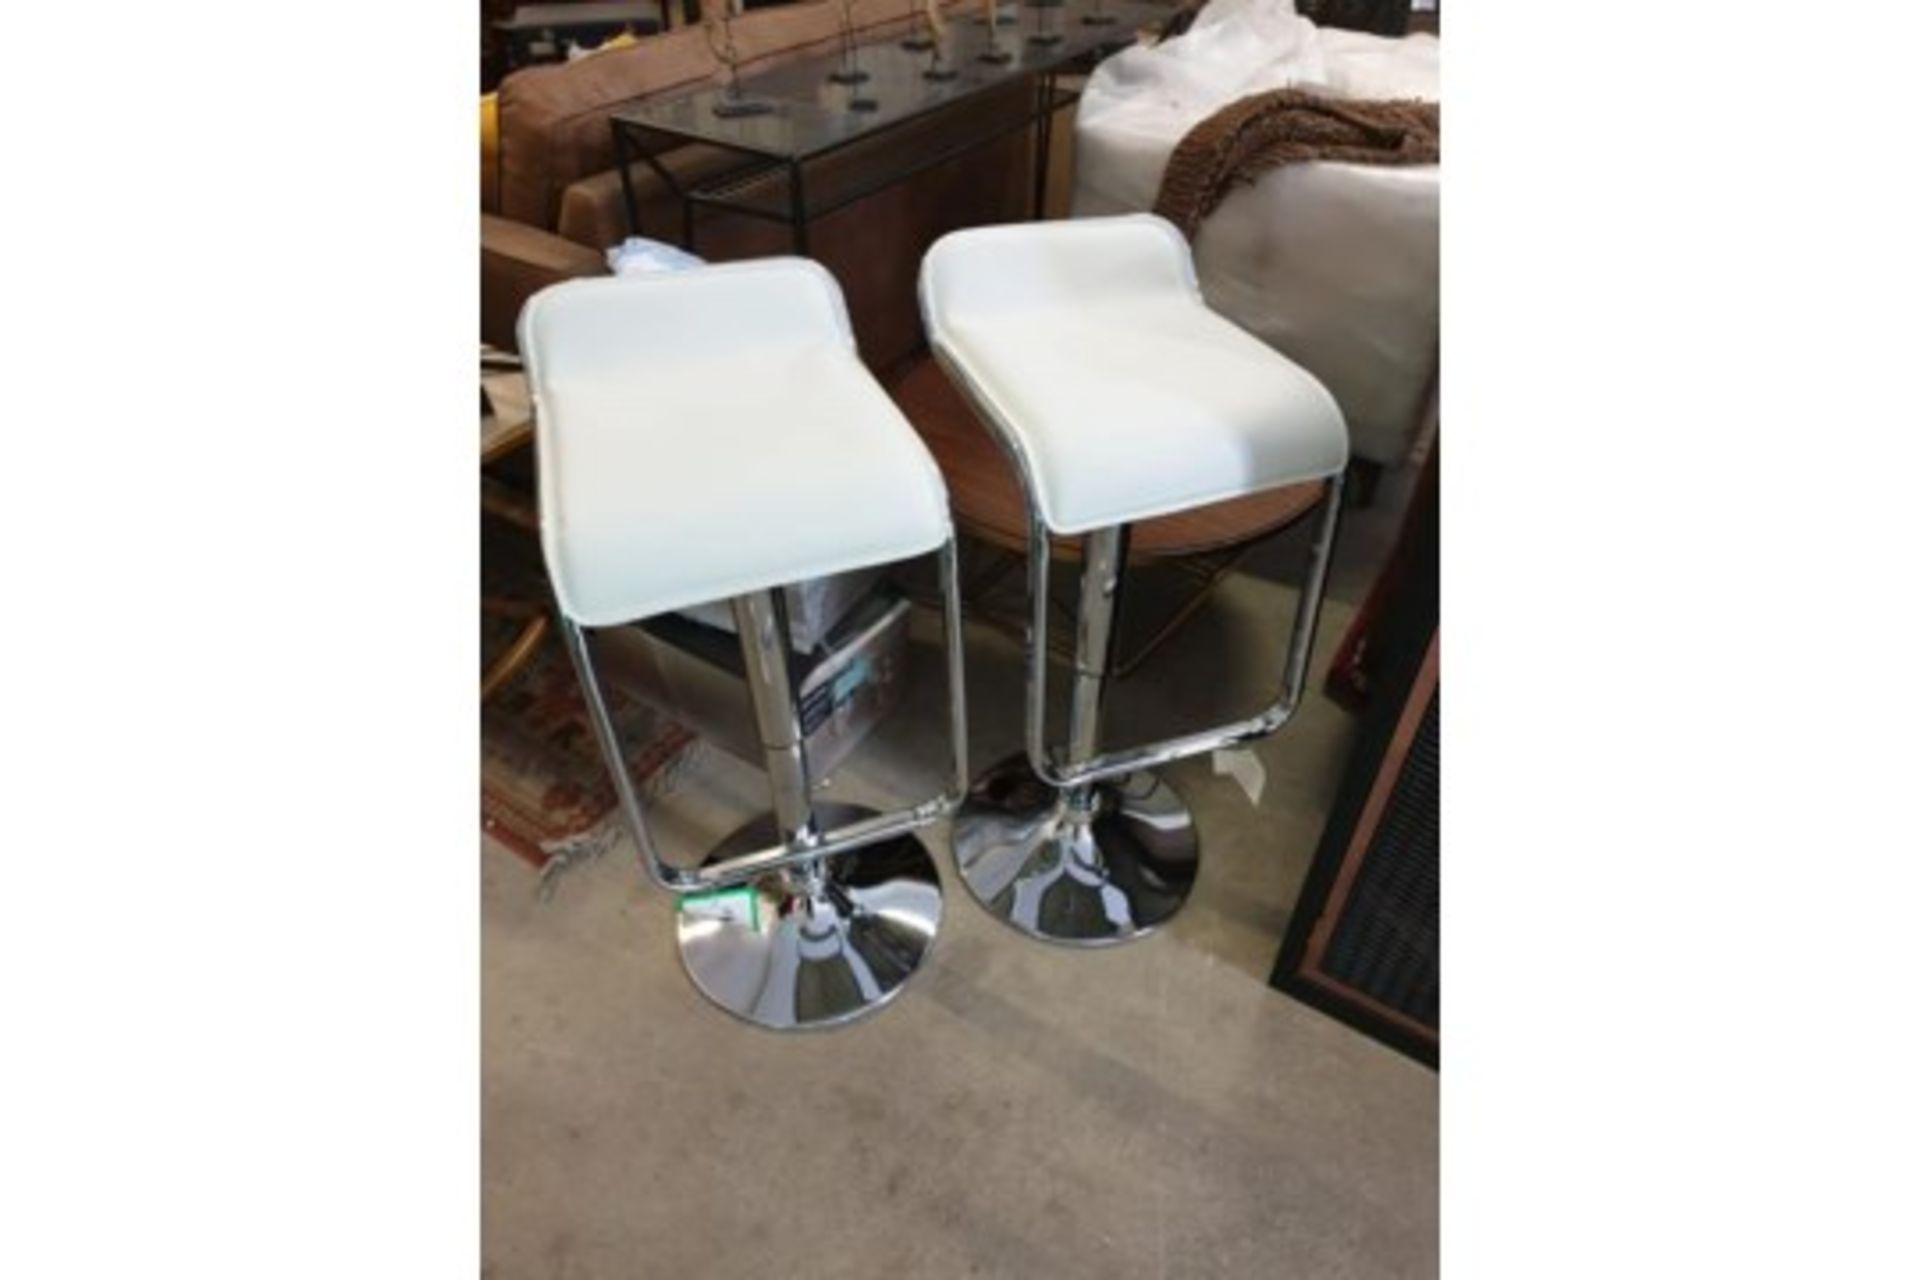 A Pair Of White Leather Adjustable Height Chrome Breakfast Bar Stools With Footrest 43cm Pitch